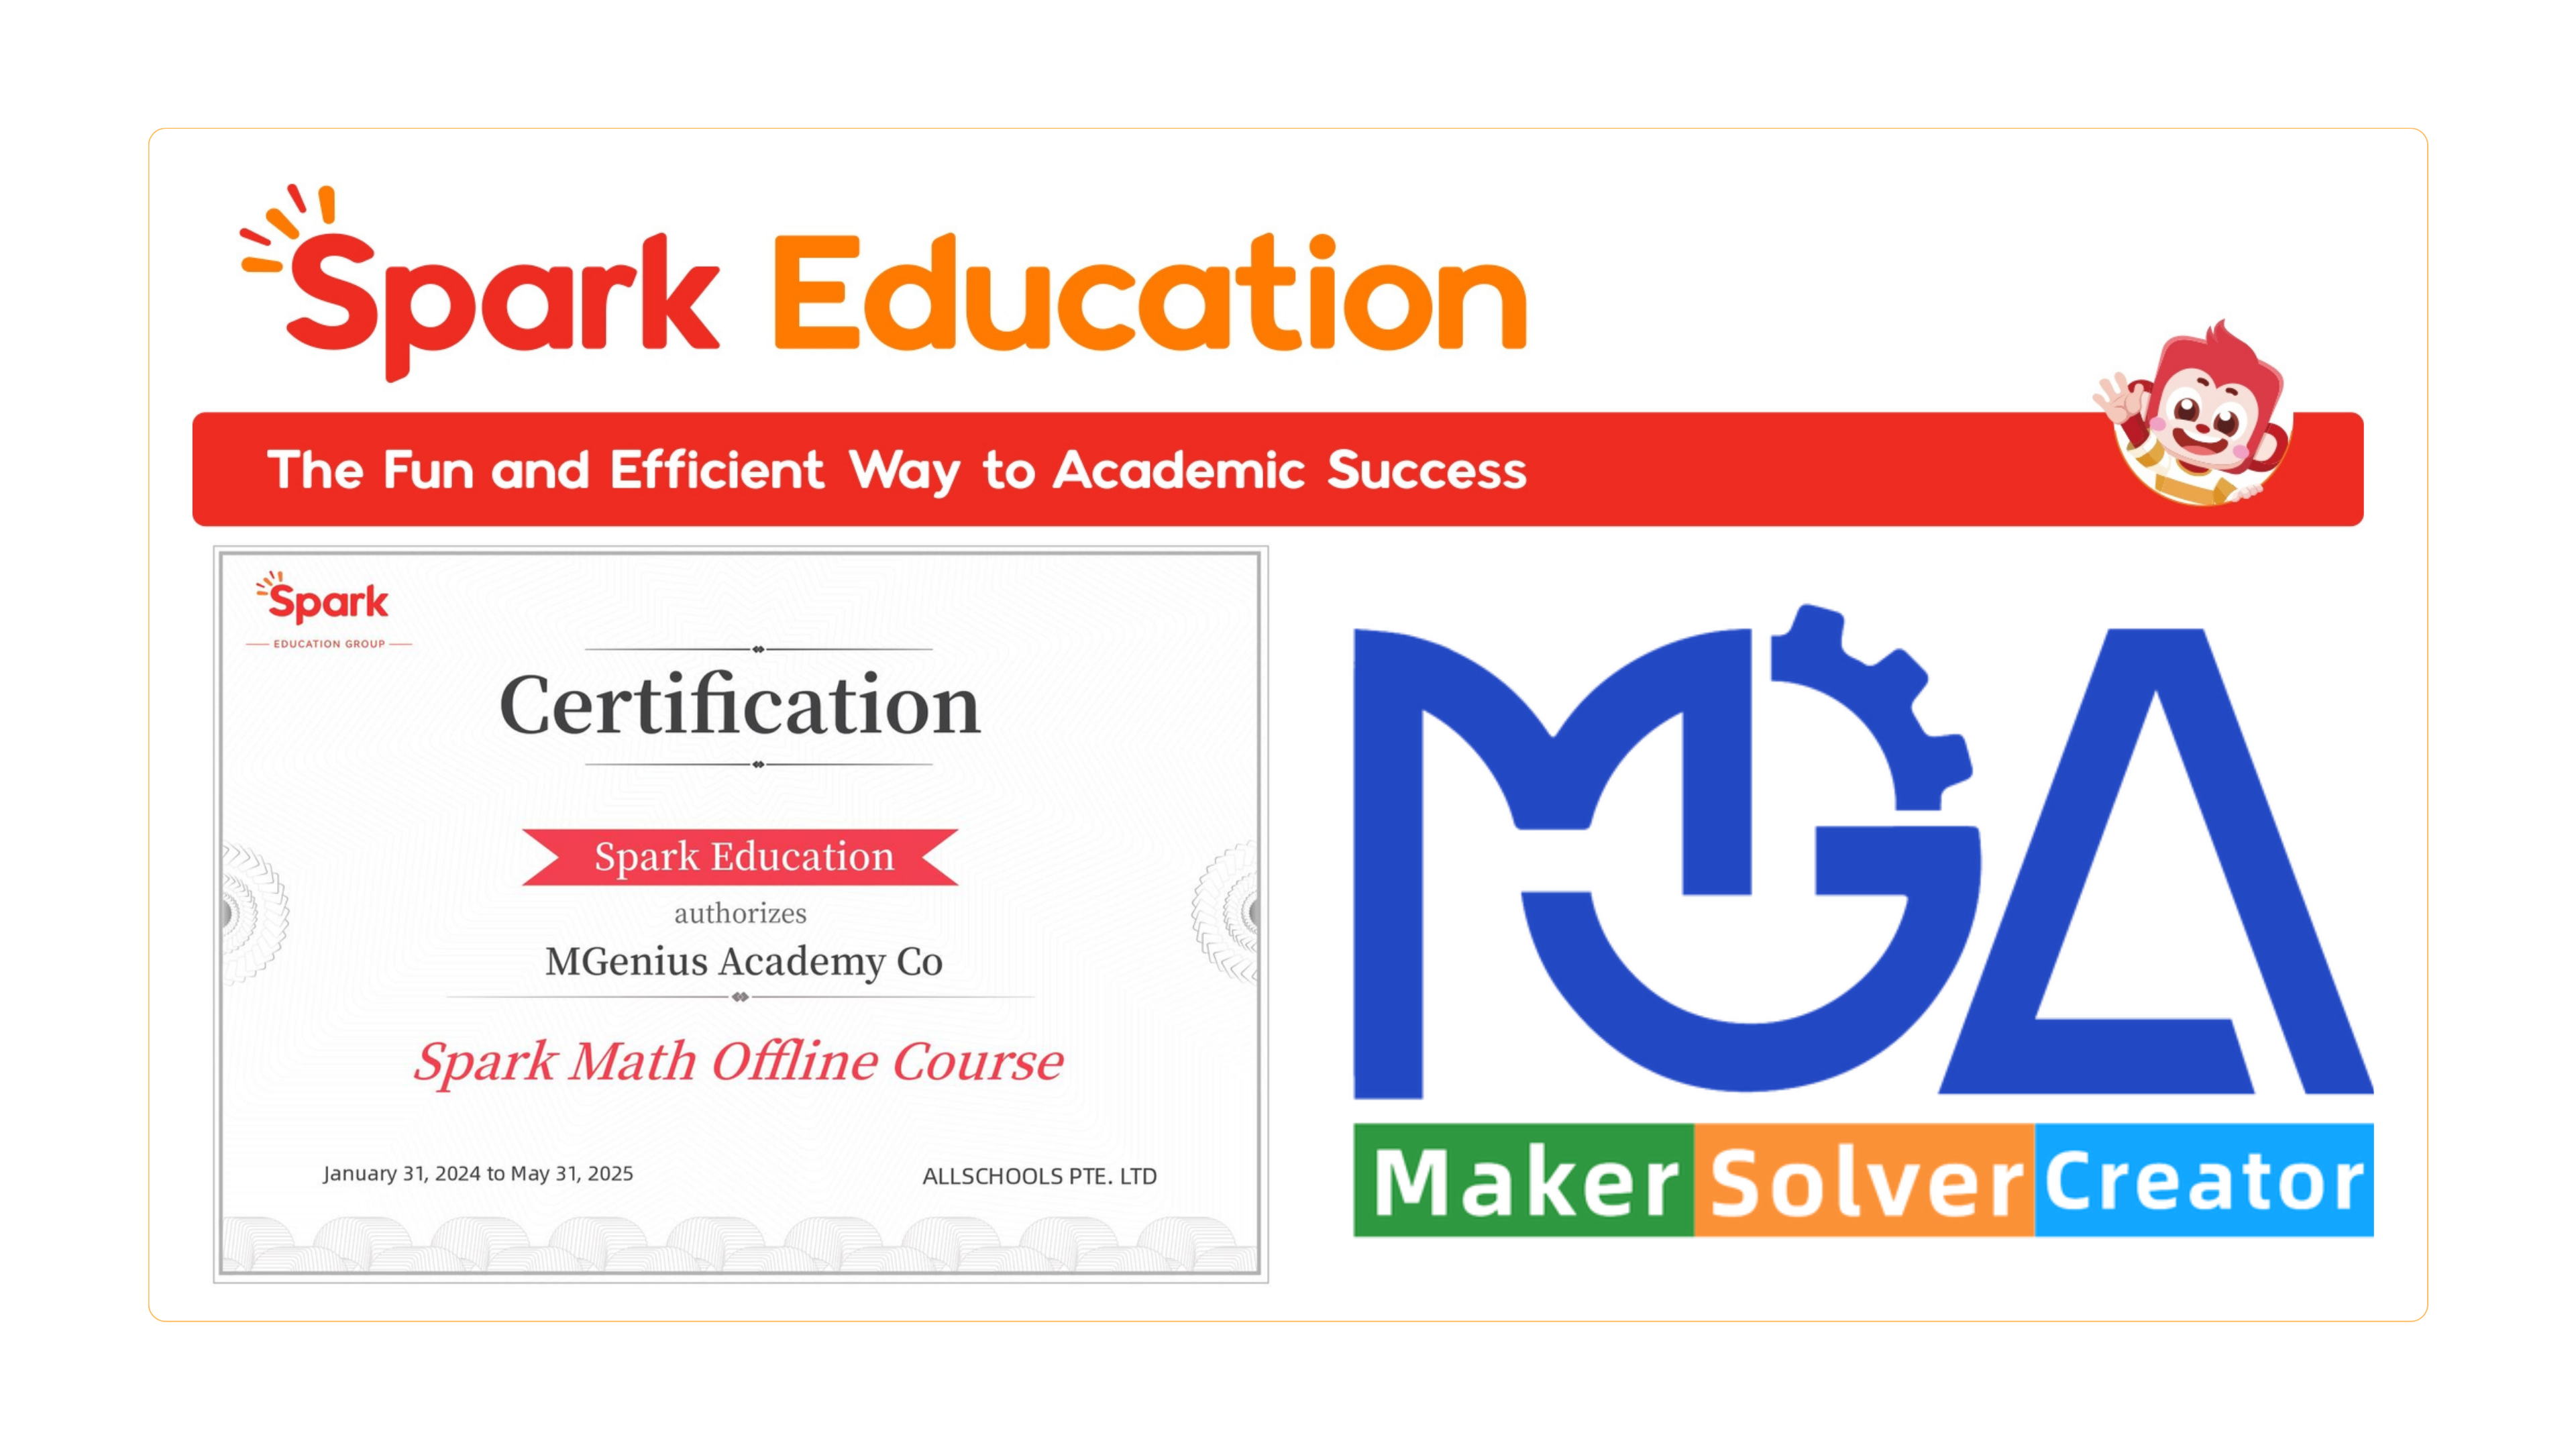 Spark Education authorizes MGenius Academy to integrate Spark Math